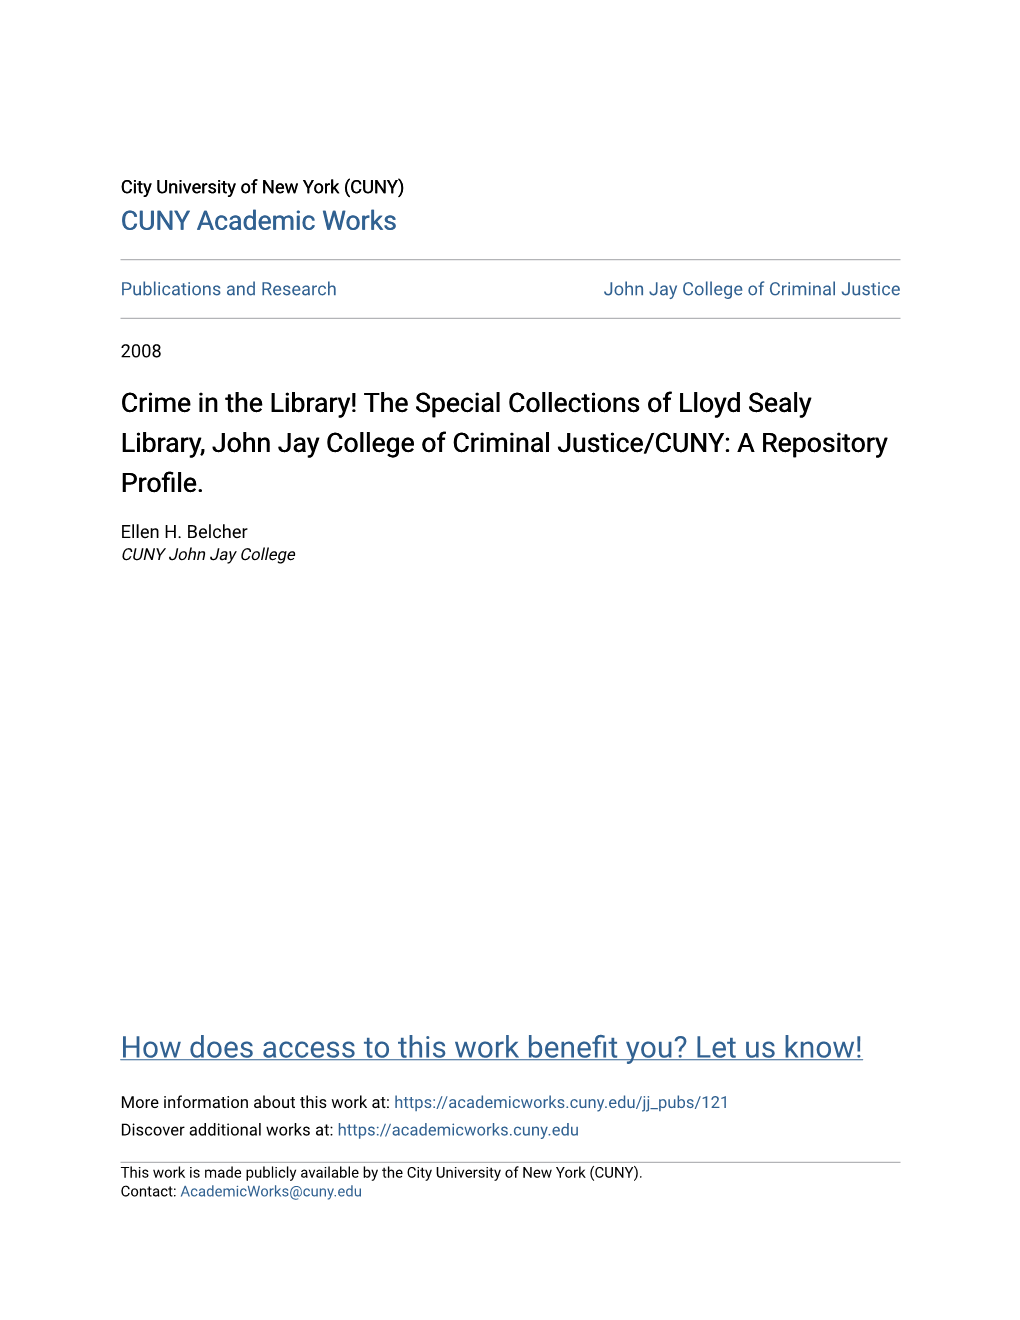 Crime in the Library! the Special Collections of Lloyd Sealy Library, John Jay College of Criminal Justice/CUNY: a Repository Profile